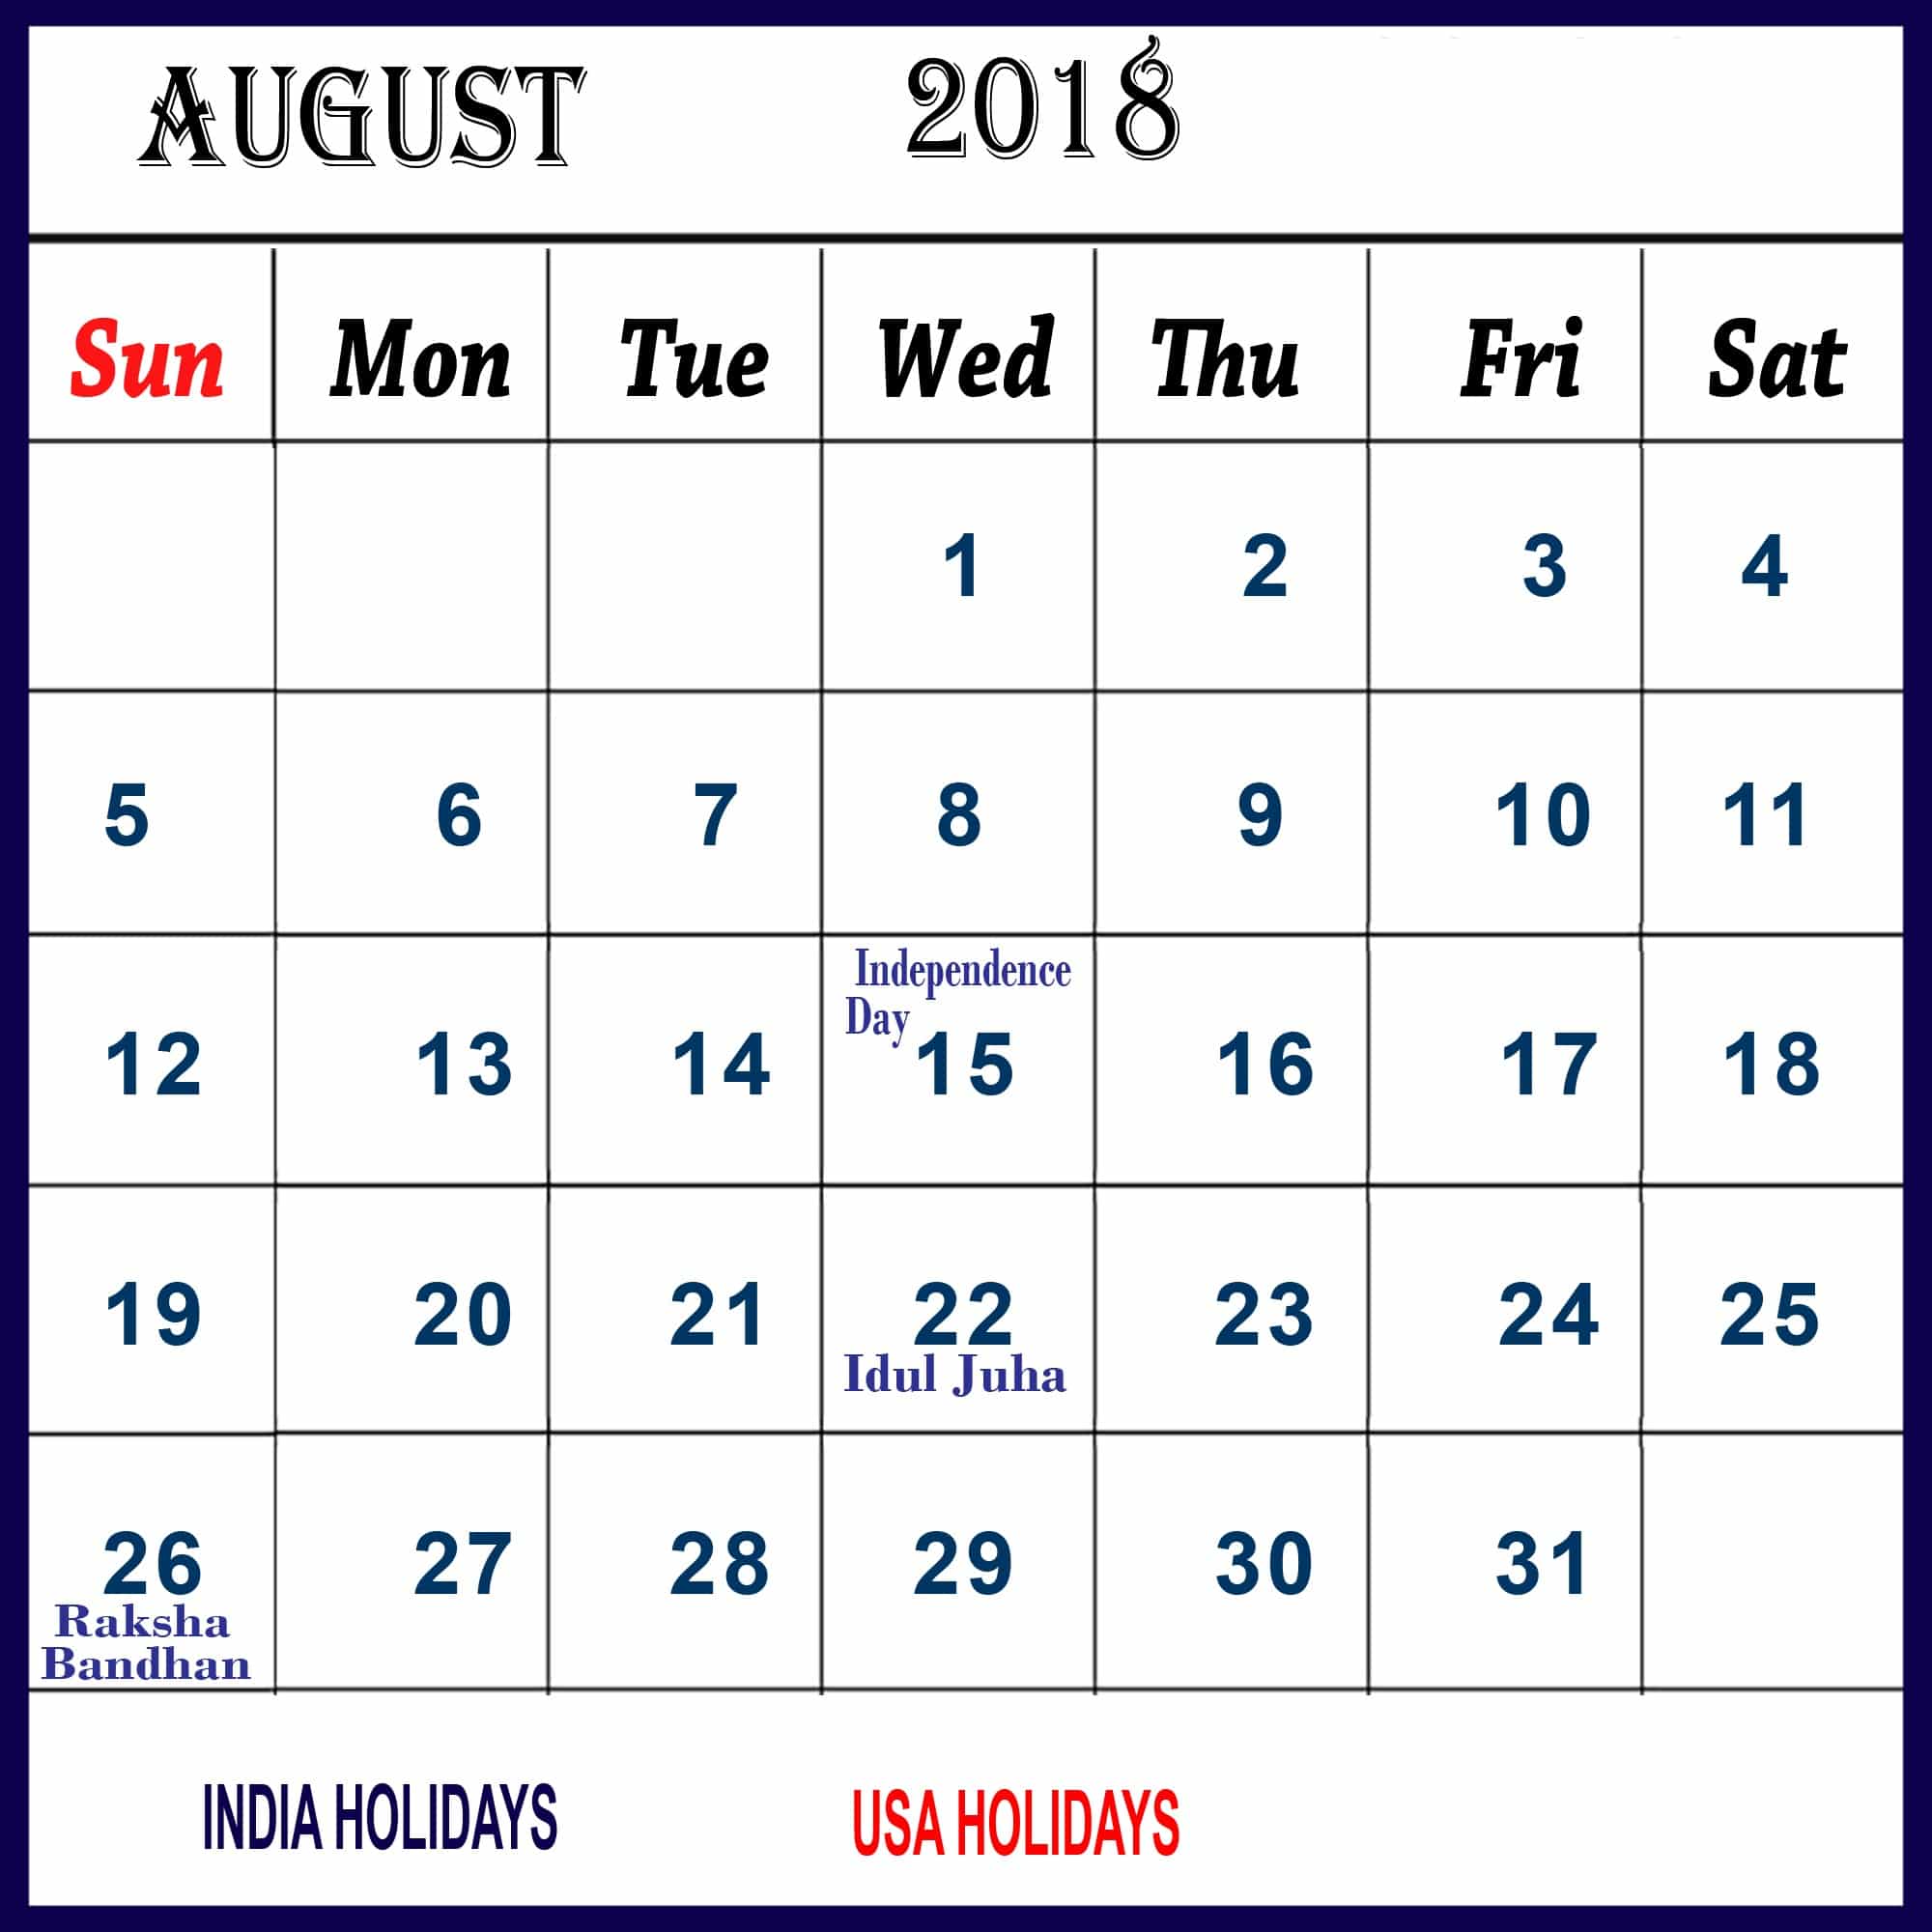 August 2018 Calendar With Indian Holidays Oppidan Library